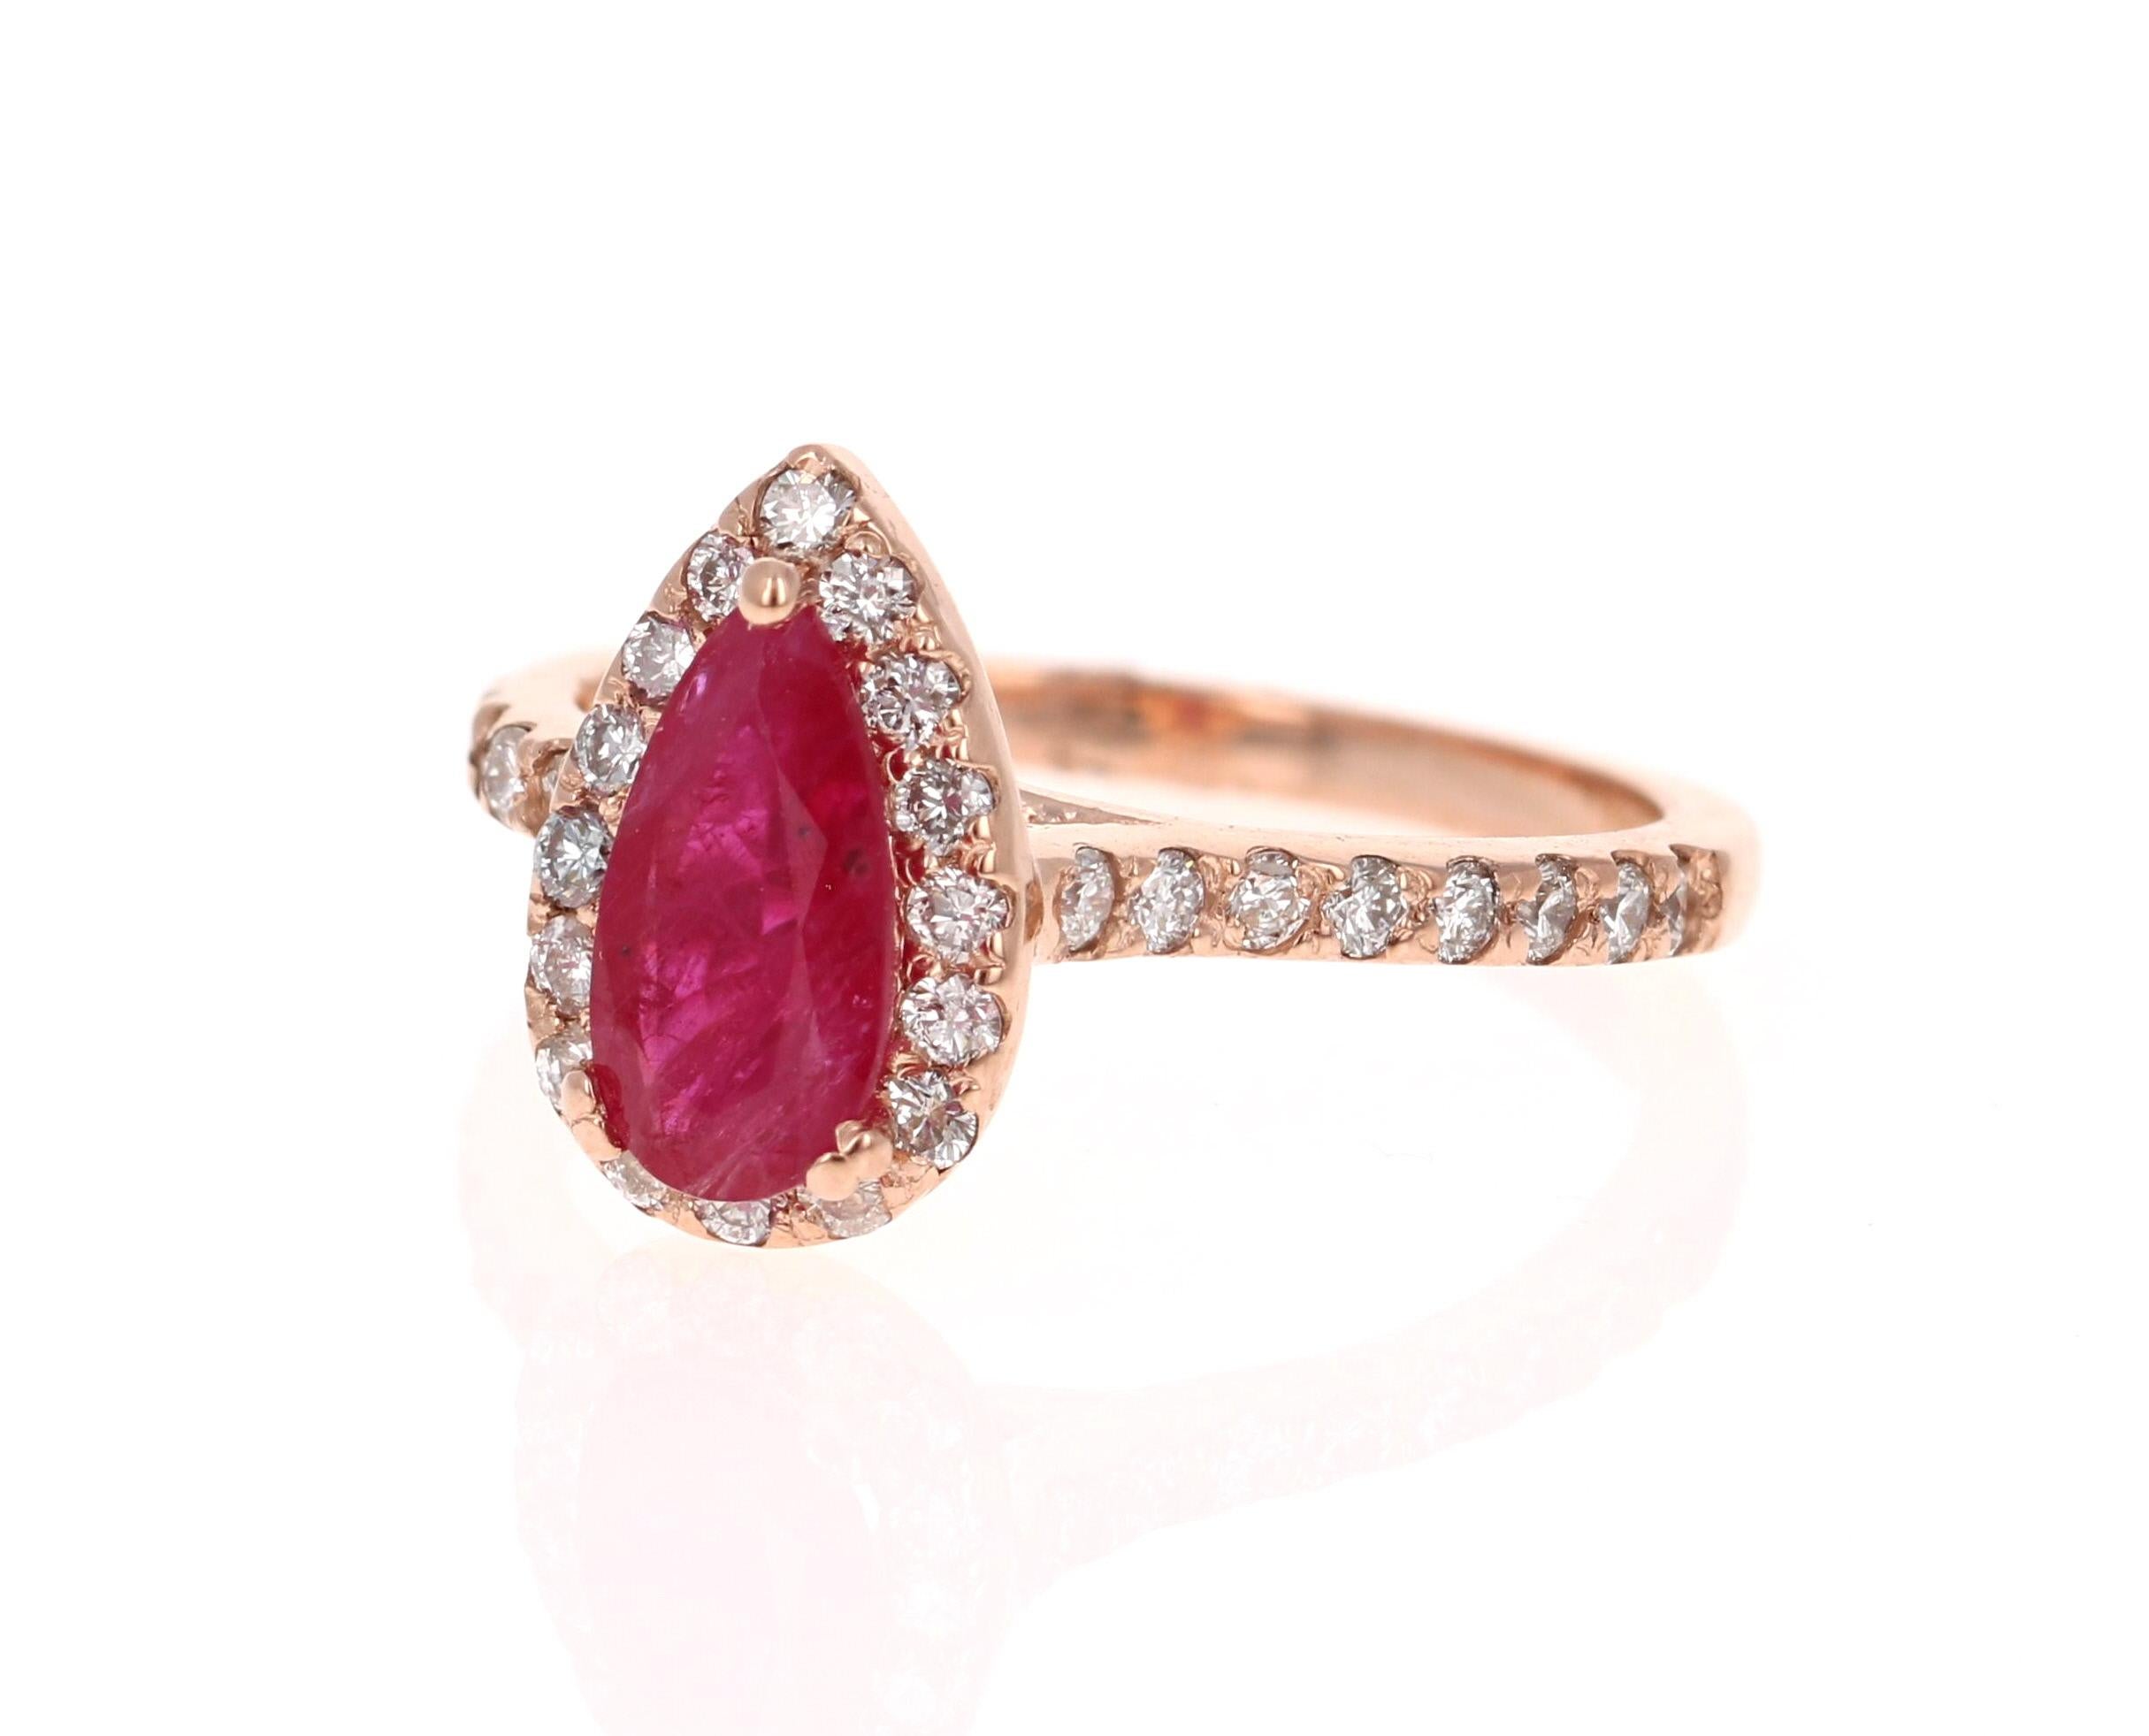 GIA Certified 1.64 Carat Ruby Diamond 14 Karat Rose Gold Bridal Ring

This ring is truly a beauty and can easily be transformed into a unique engagement or bridal ring!
There is a GIA Certified Pear Cut Ruby set in the center of the ring that weighs